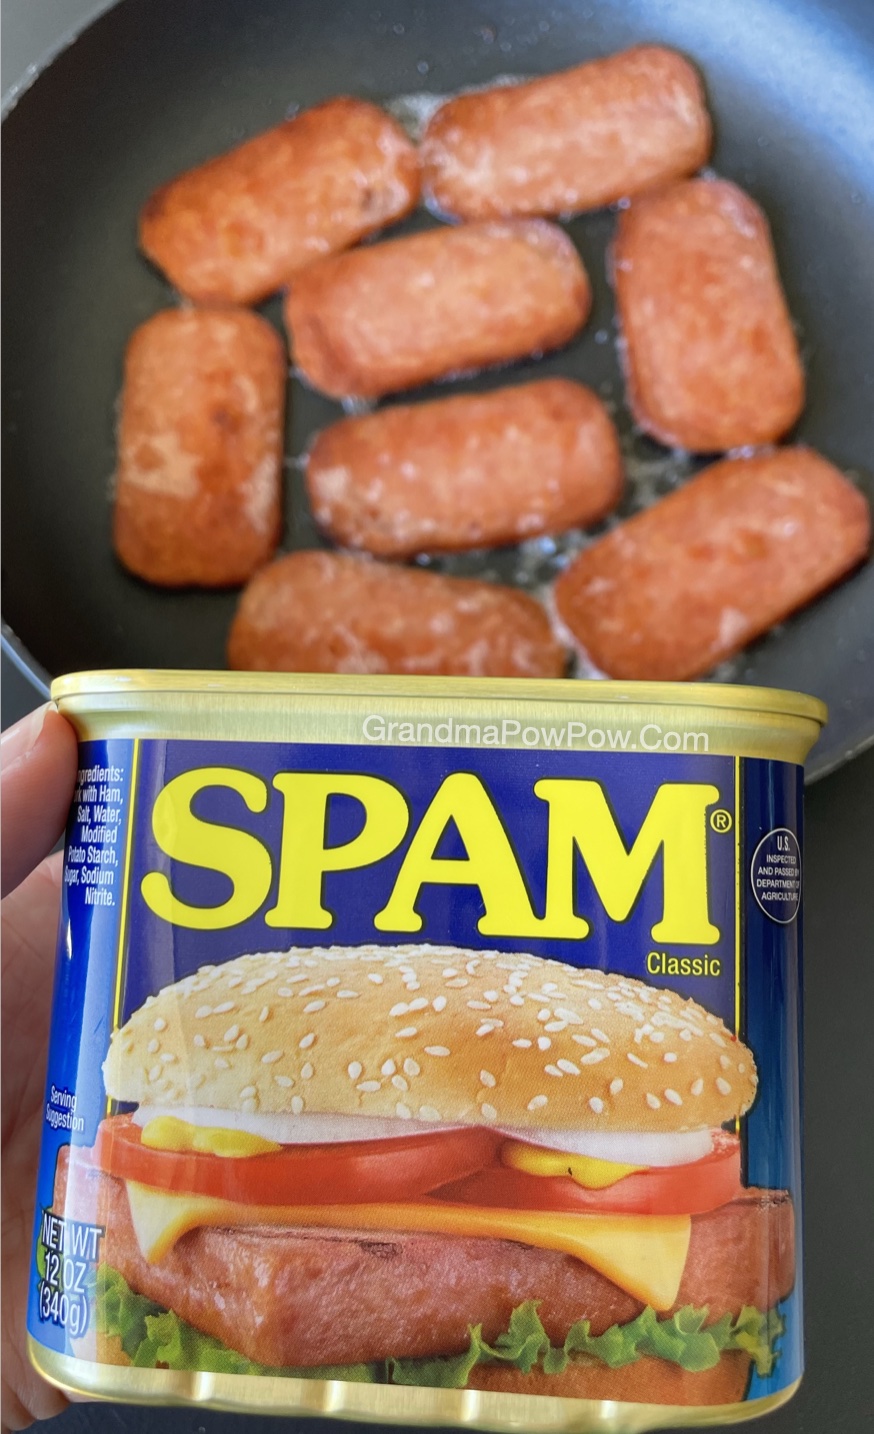 Spam is a great addition to just about any meal. The best protein in a can! Add it to casseroles, sandwiches, potatoes, eggs, soups, salads, and more. Here is a list of my favorite spam recipes that are a breeze to throw together for last minute meals.